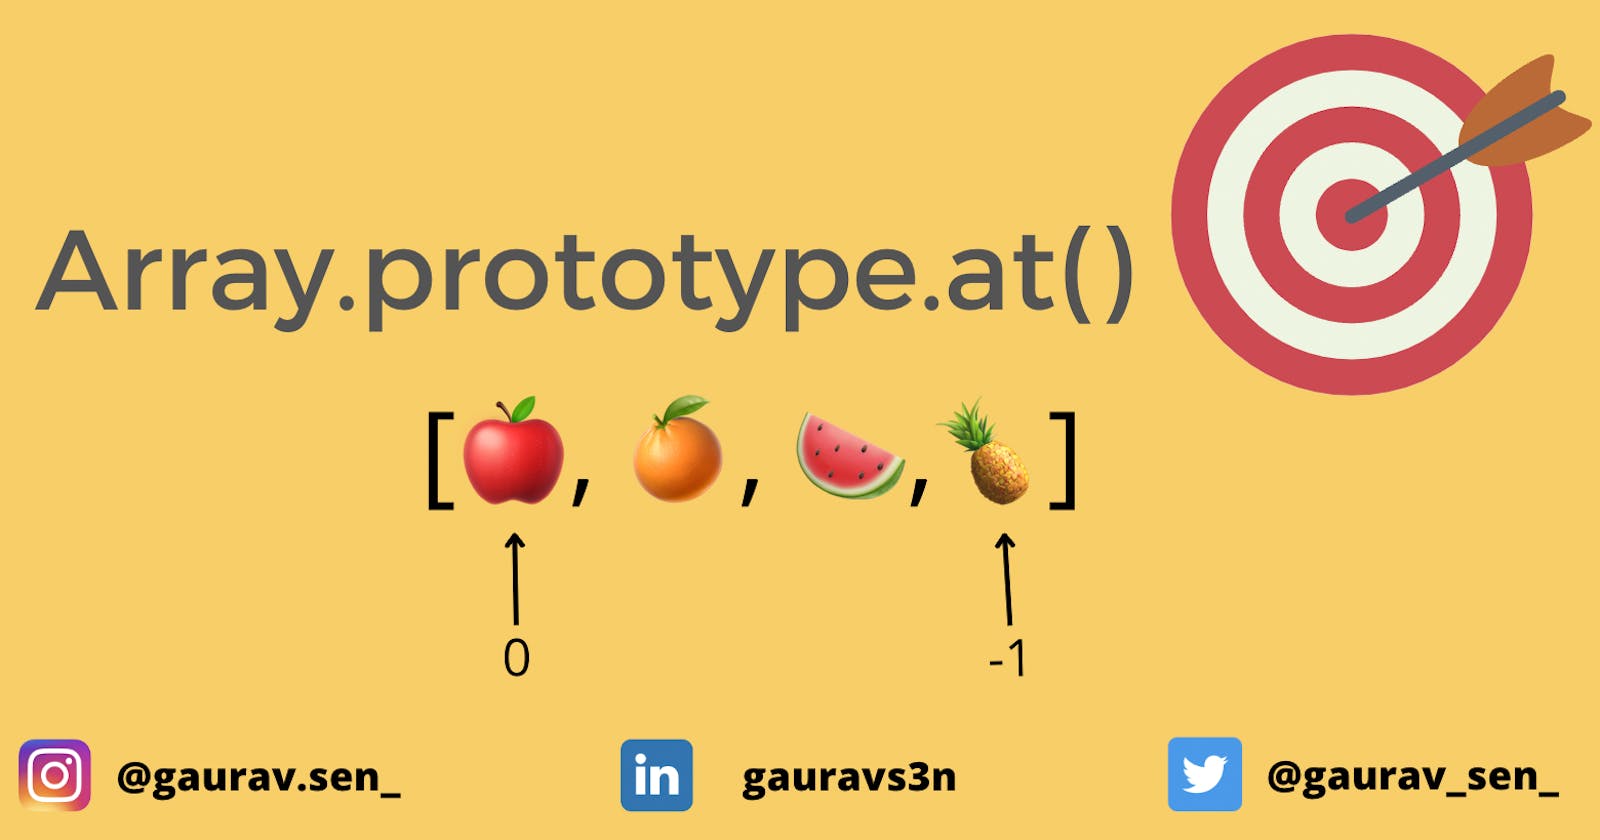 Array. prototype. at() - An intuitive way to retrieve elements